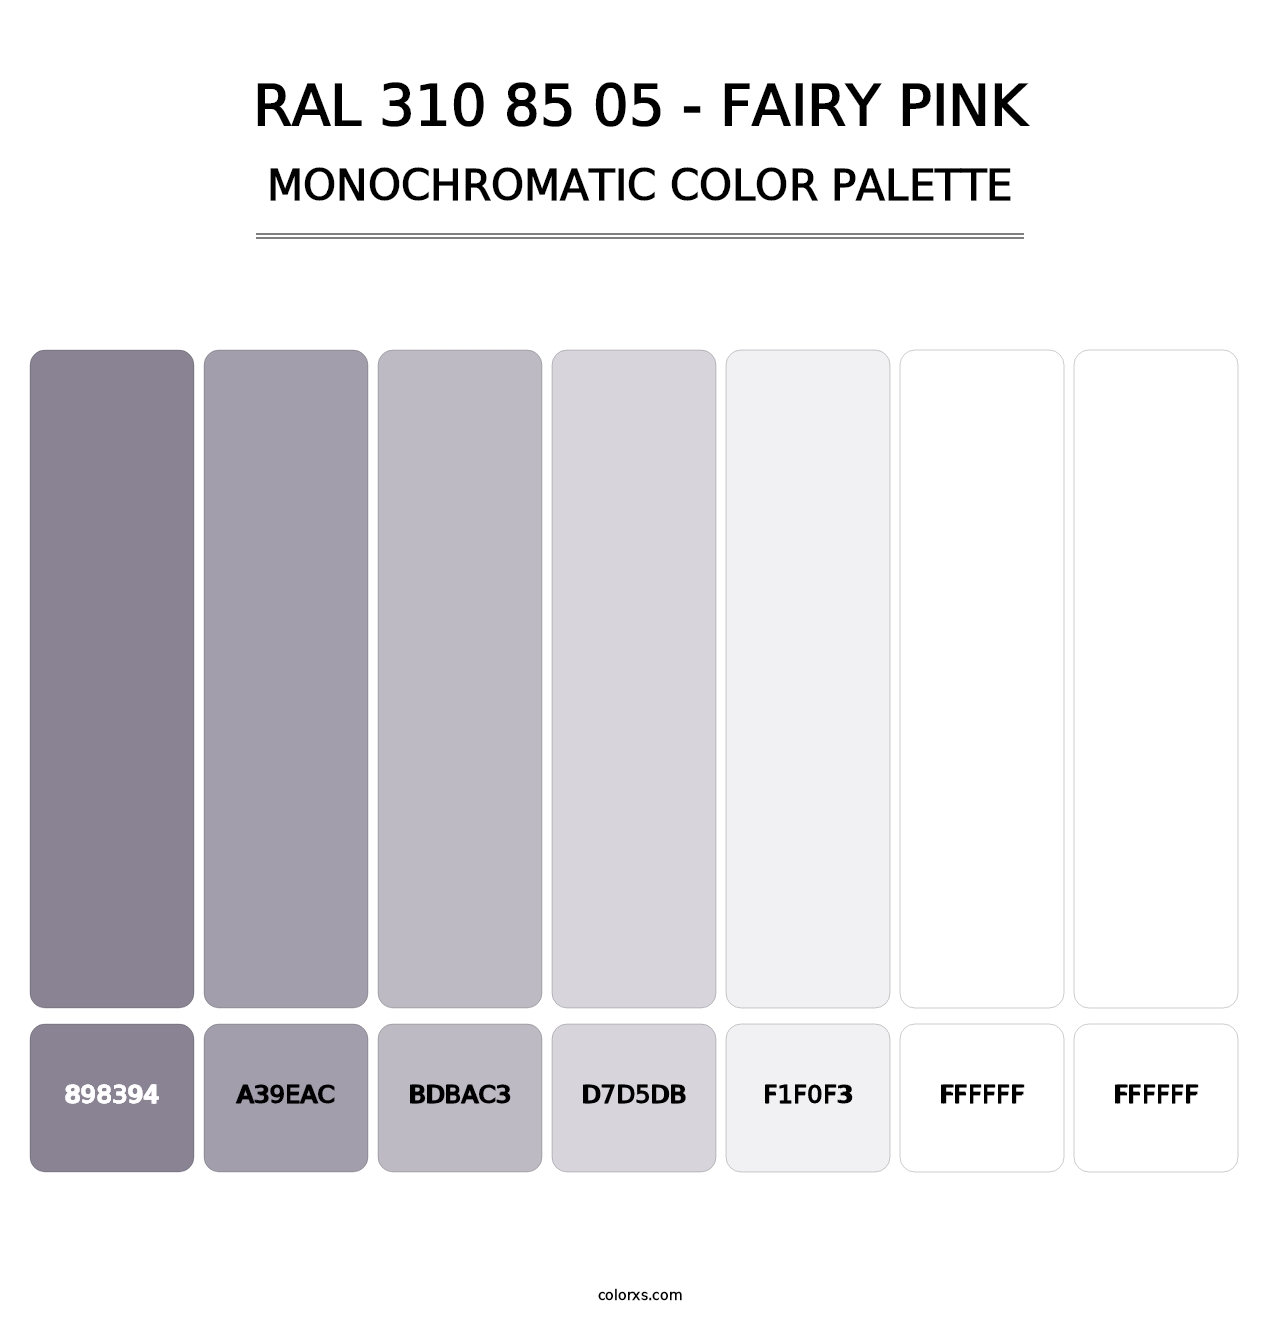 RAL 310 85 05 - Fairy Pink - Monochromatic Color Palette